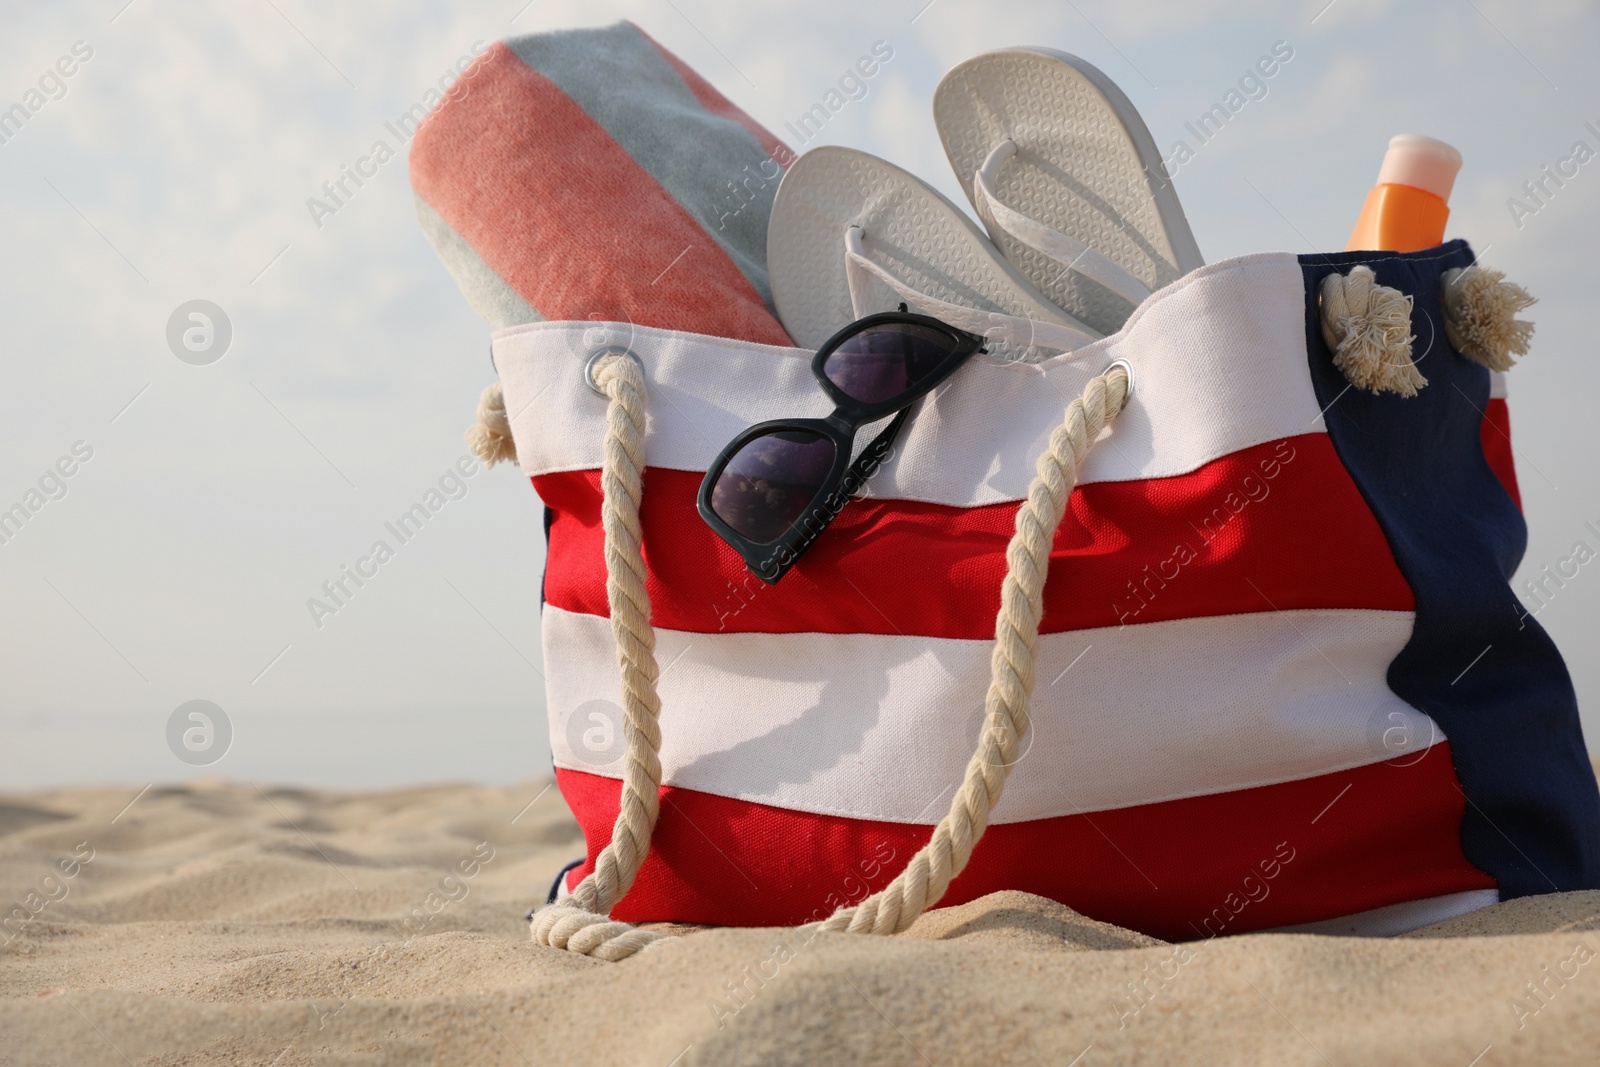 Photo of Beach bag with flip flops, towel, sunglasses and sunscreen on sand